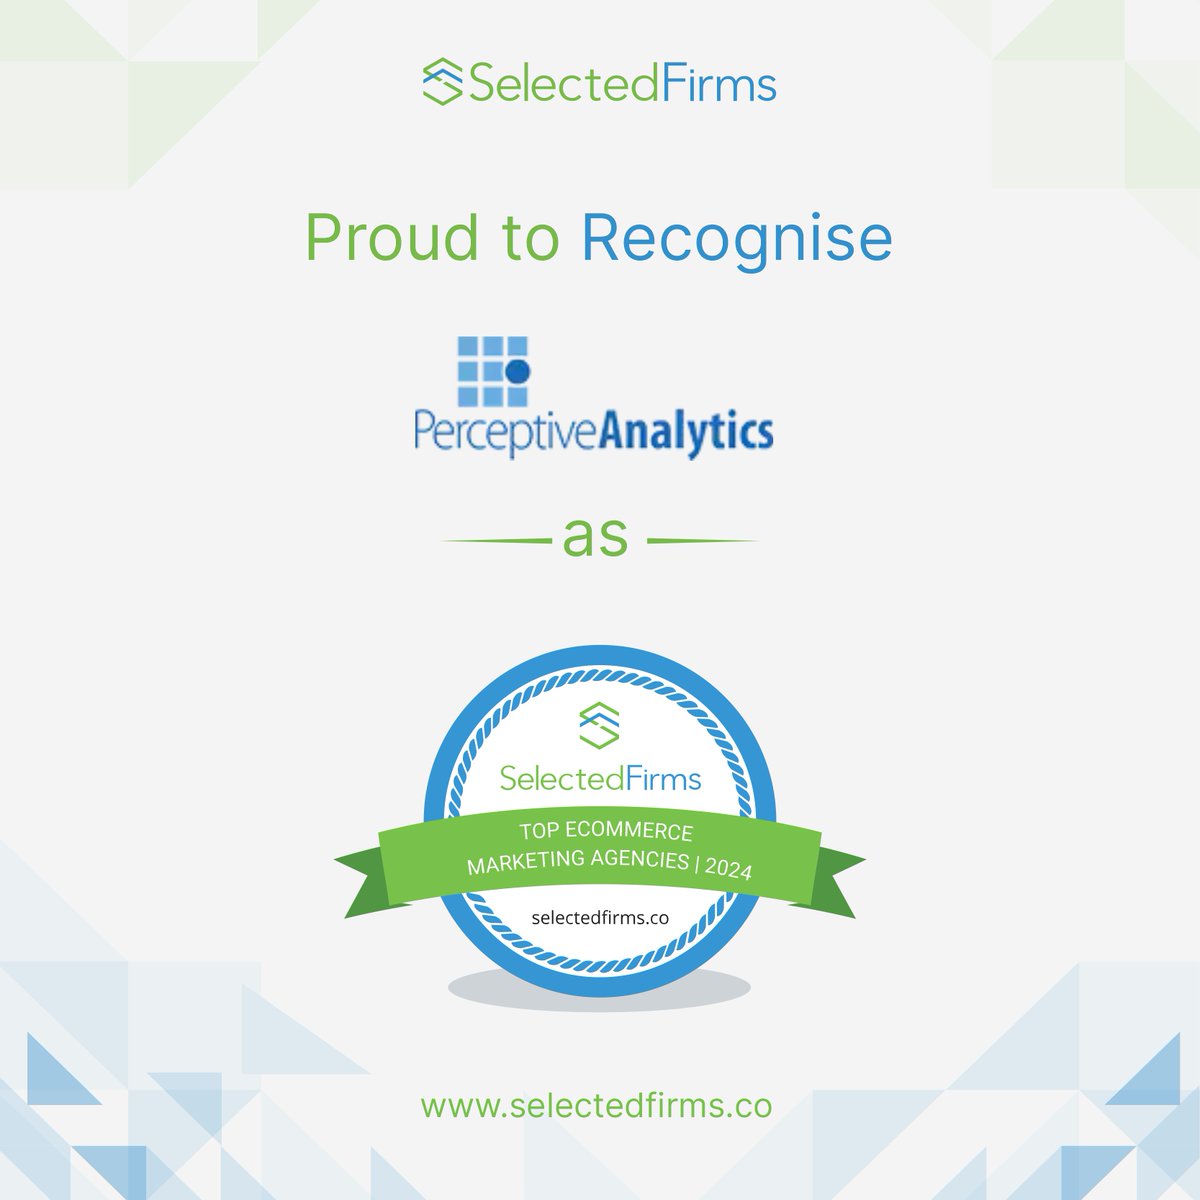 SelectedFirms recognizes @perceptiveanaly as a top eCommerce marketing agency!
bit.ly/49WnAEW